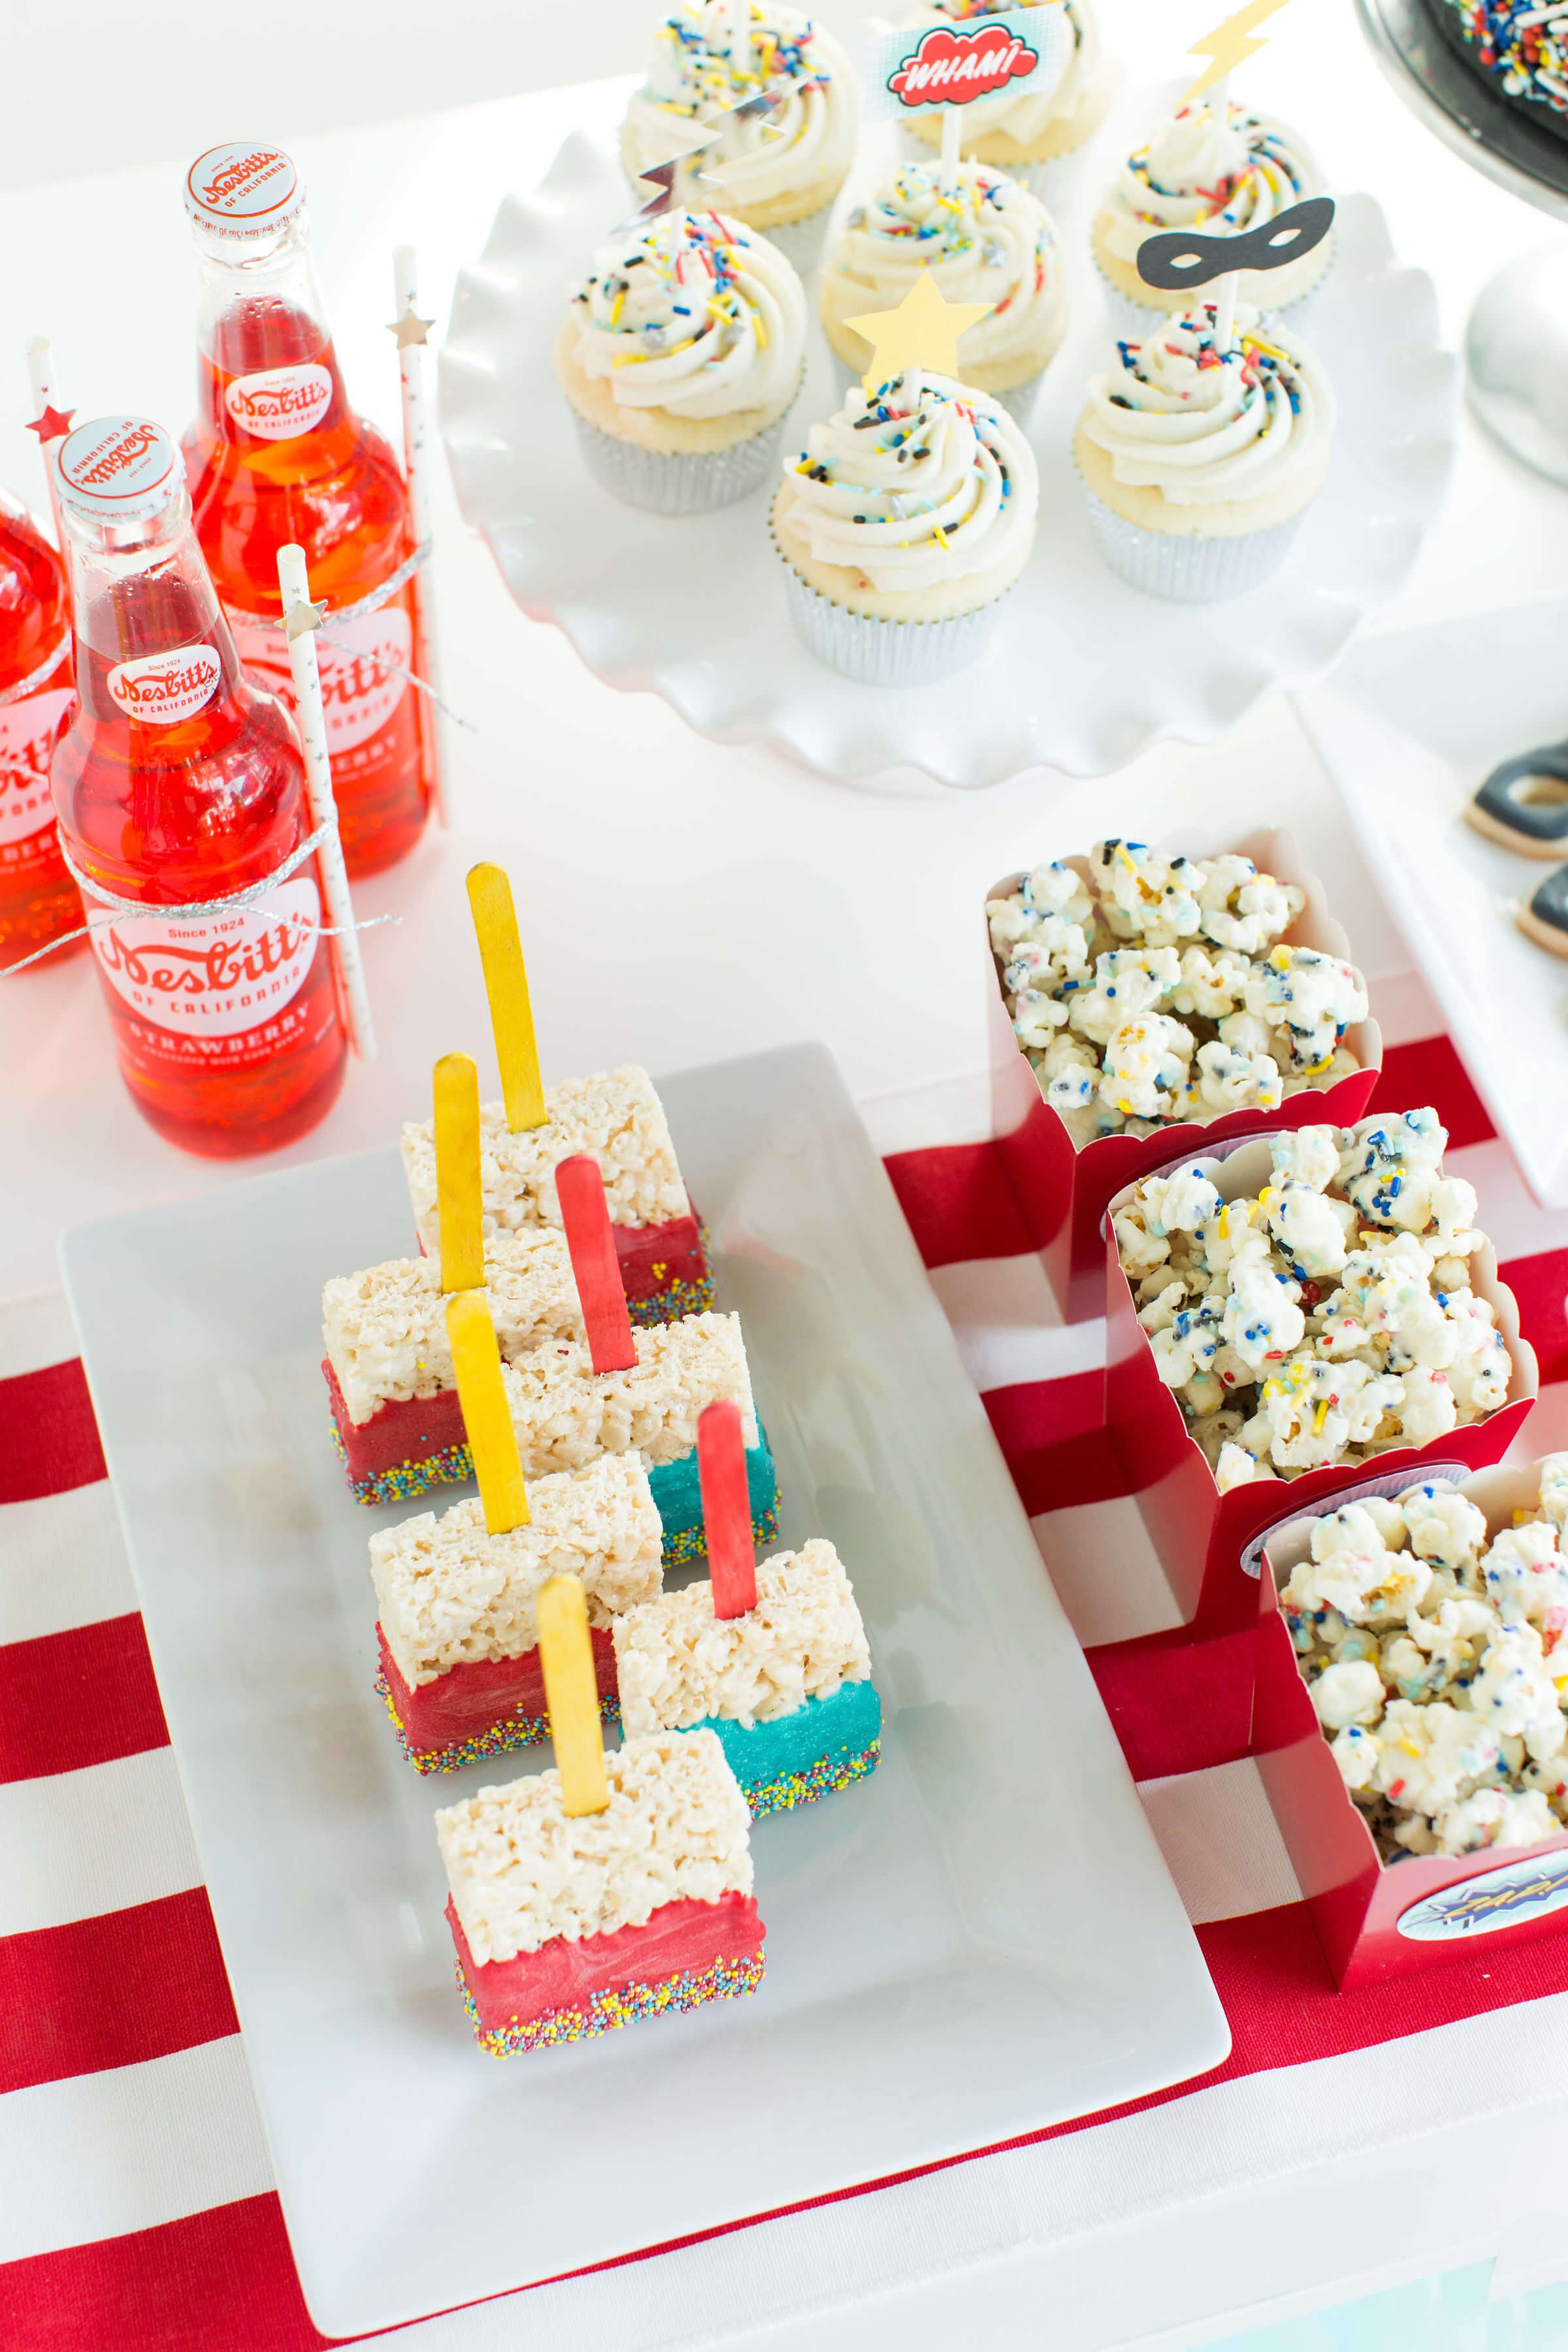 Dessert Table from Superhero Party by Kiss Me Kate Studio | Black Twine